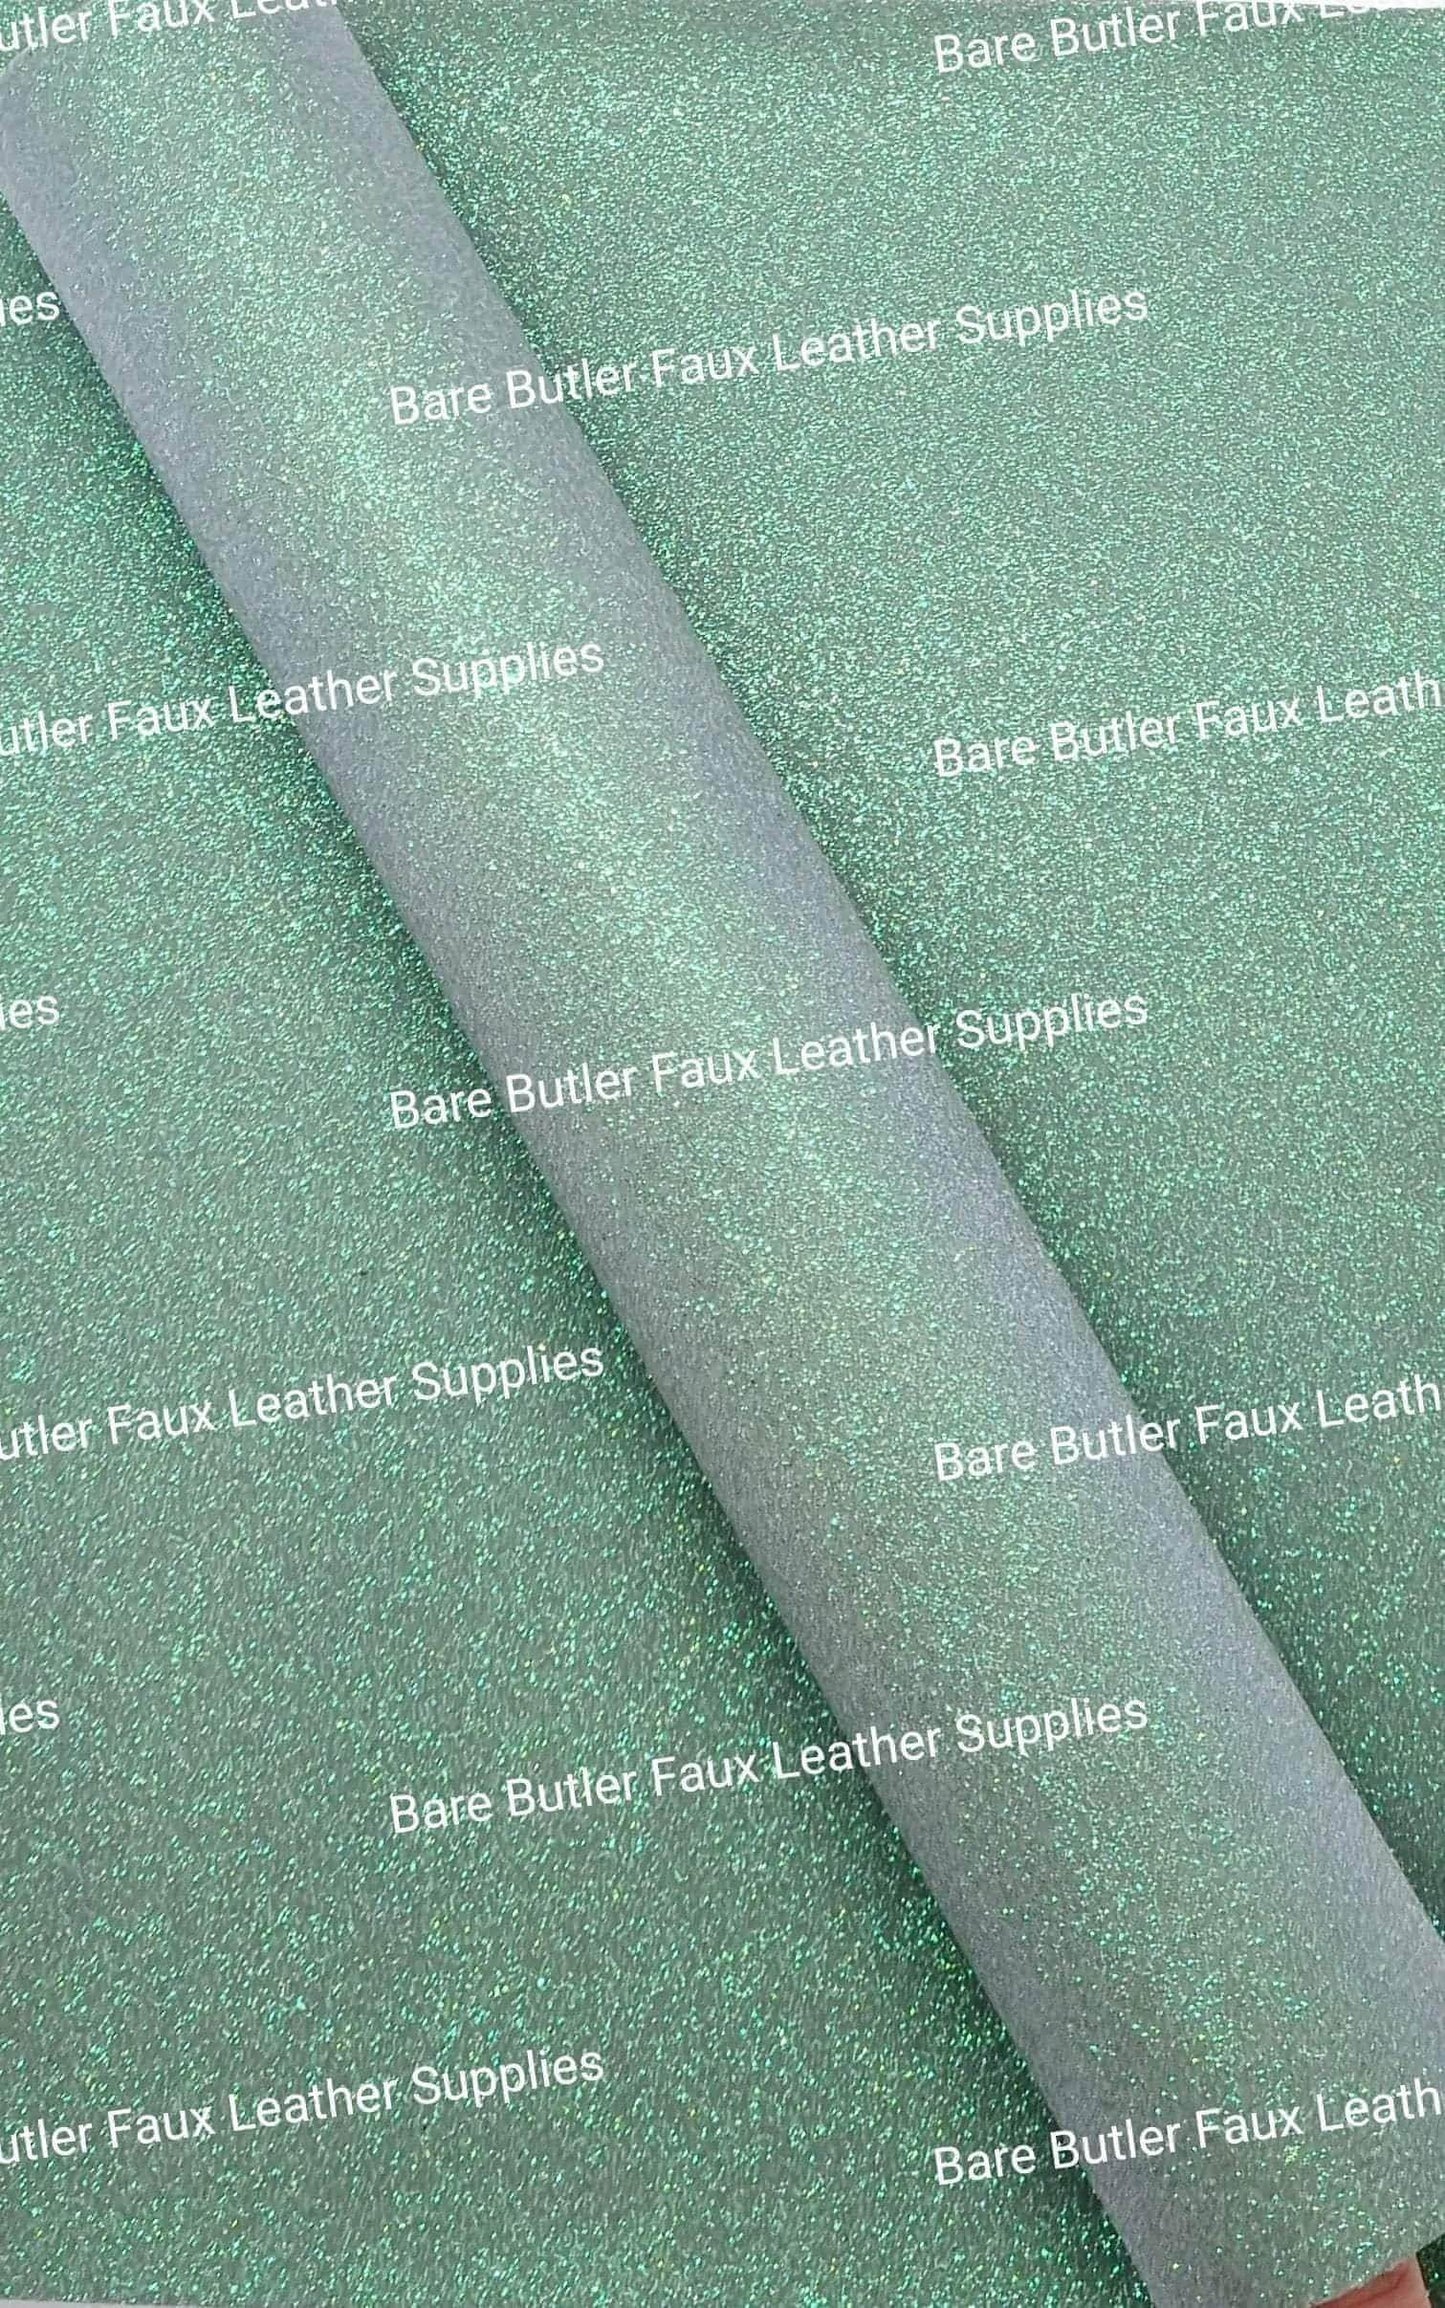 Glitter - Olive - Berry, Faux, Faux Leather, Fine, Glitter, Leather, leatherette, Super - Bare Butler Faux Leather Supplies 